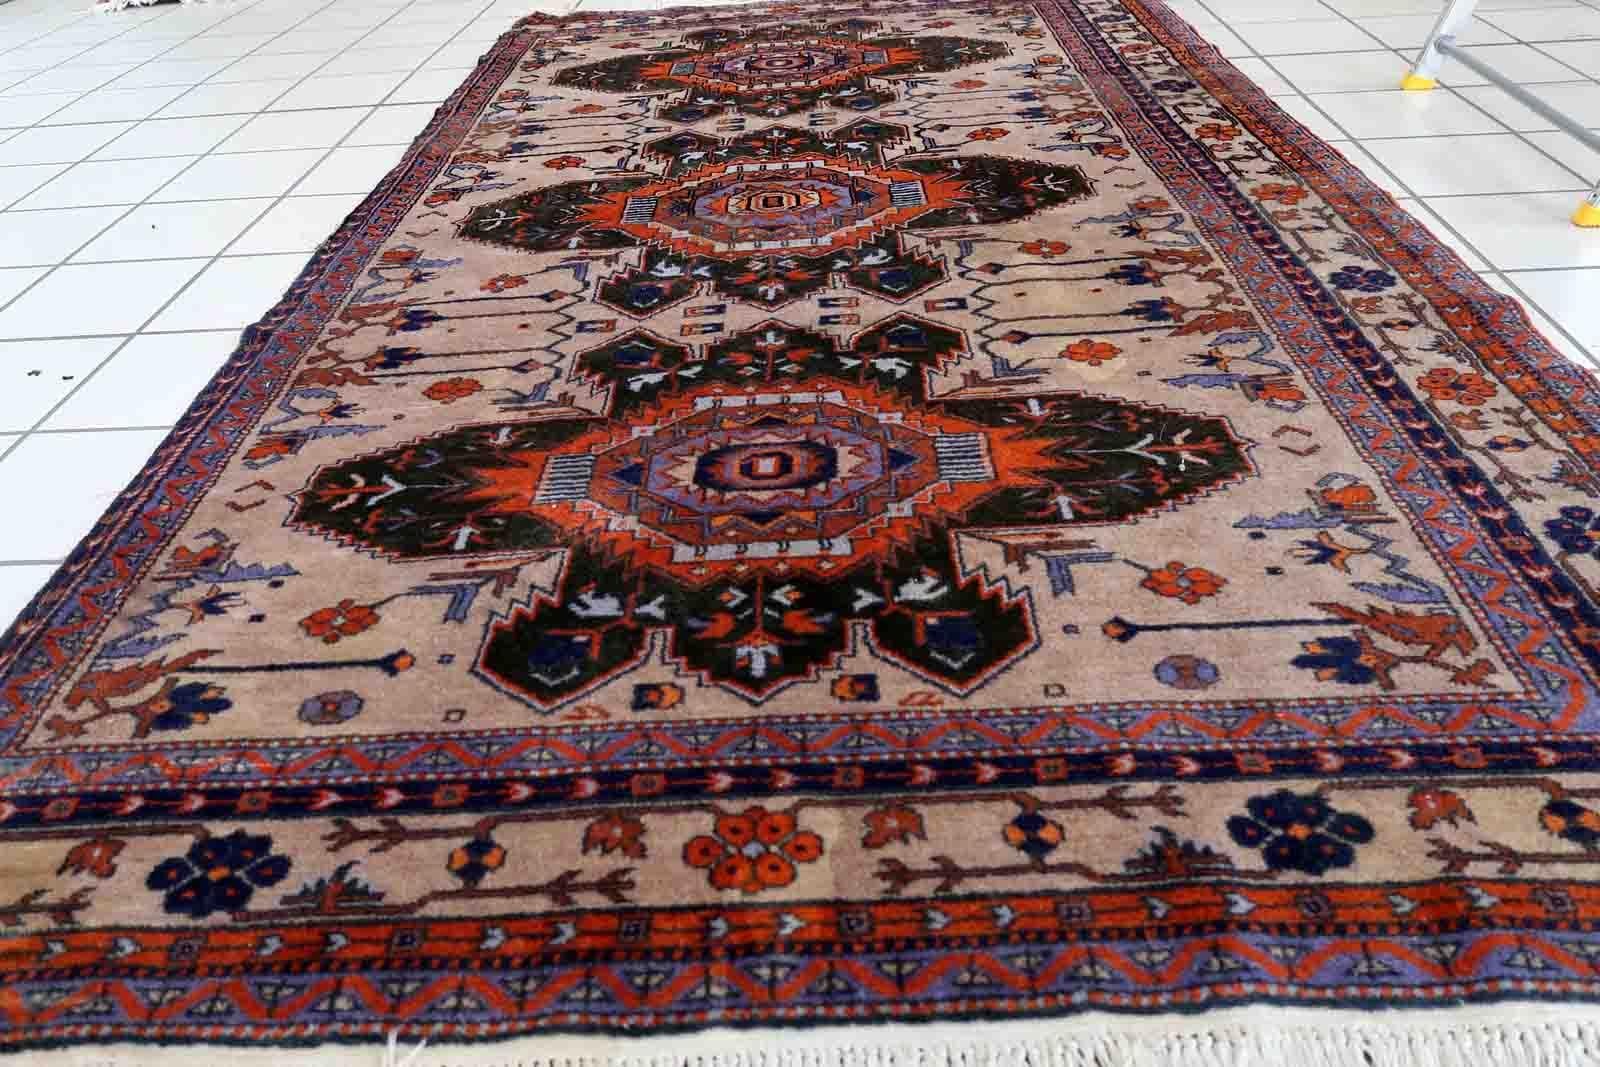 Handmade vintage Caucasian Kazak rug in traditional medallion design. The rug is from the middle of 20th century in original condition, it is missing one side.

-condition: original, missing one side,

-circa: 1960s,

-Size: 4' x 6.9' (123cm x